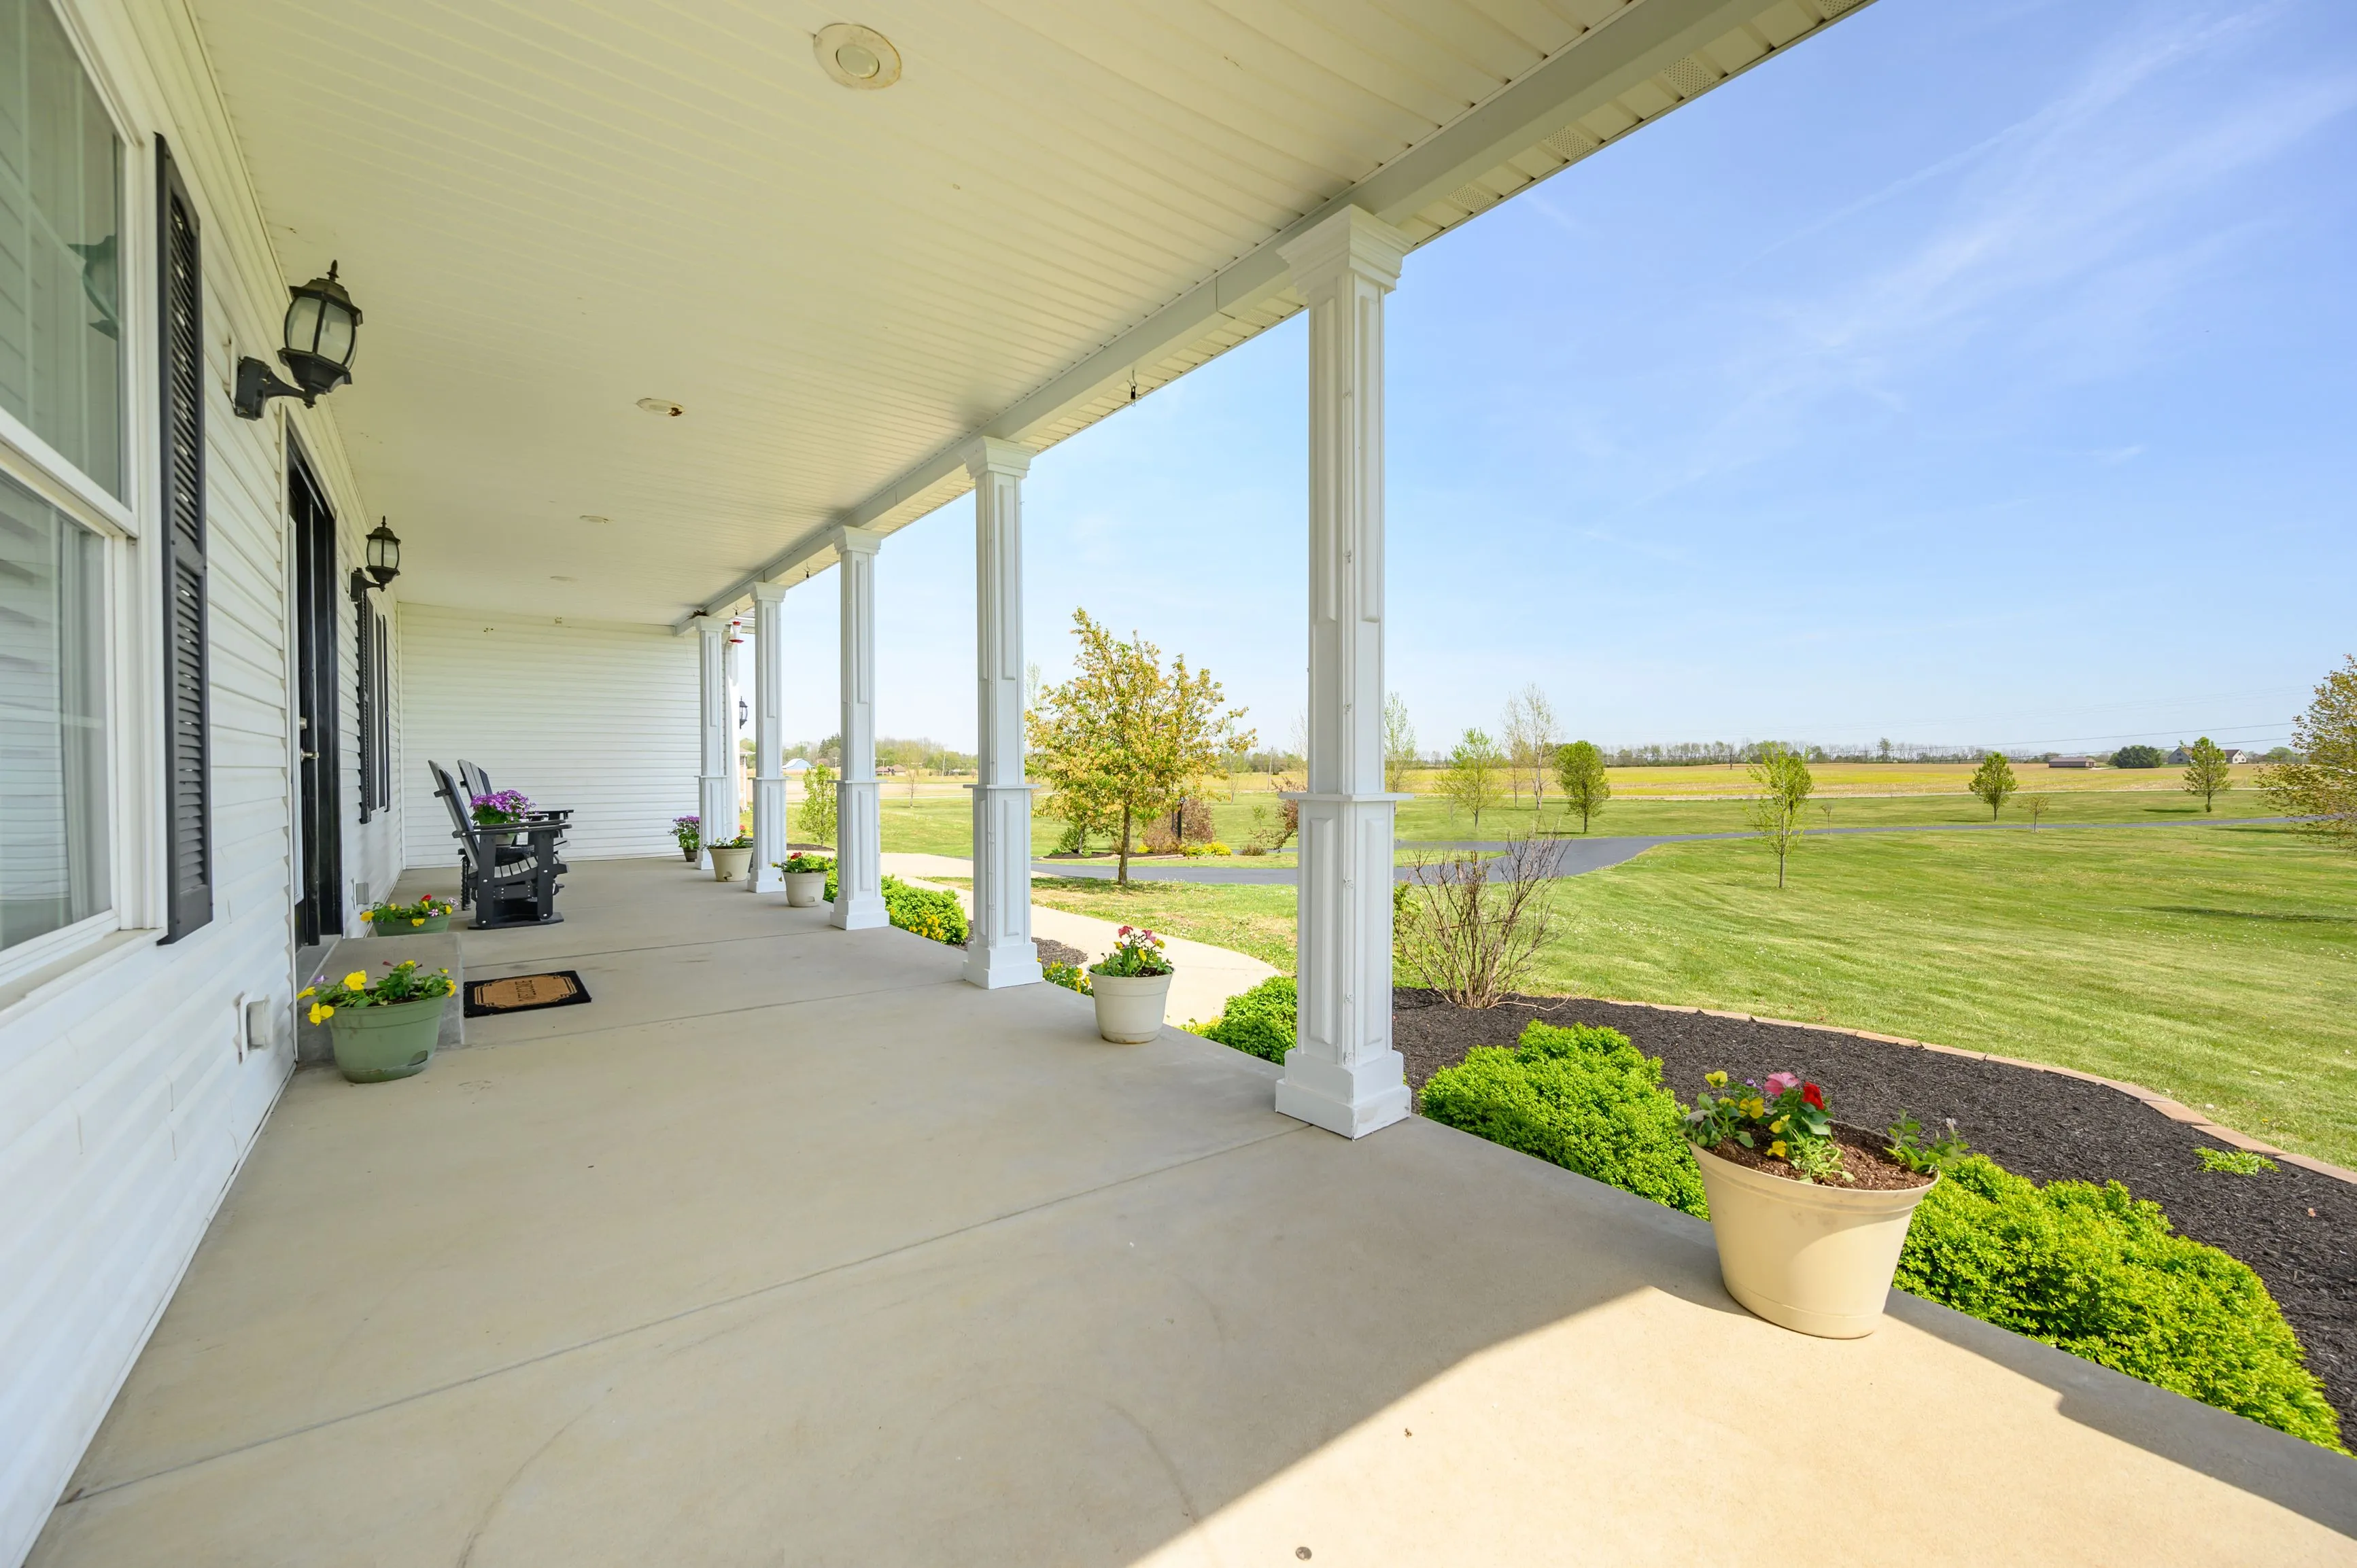 Spacious porch of a country house with columns, overlooking a vast lawn and clear blue sky.